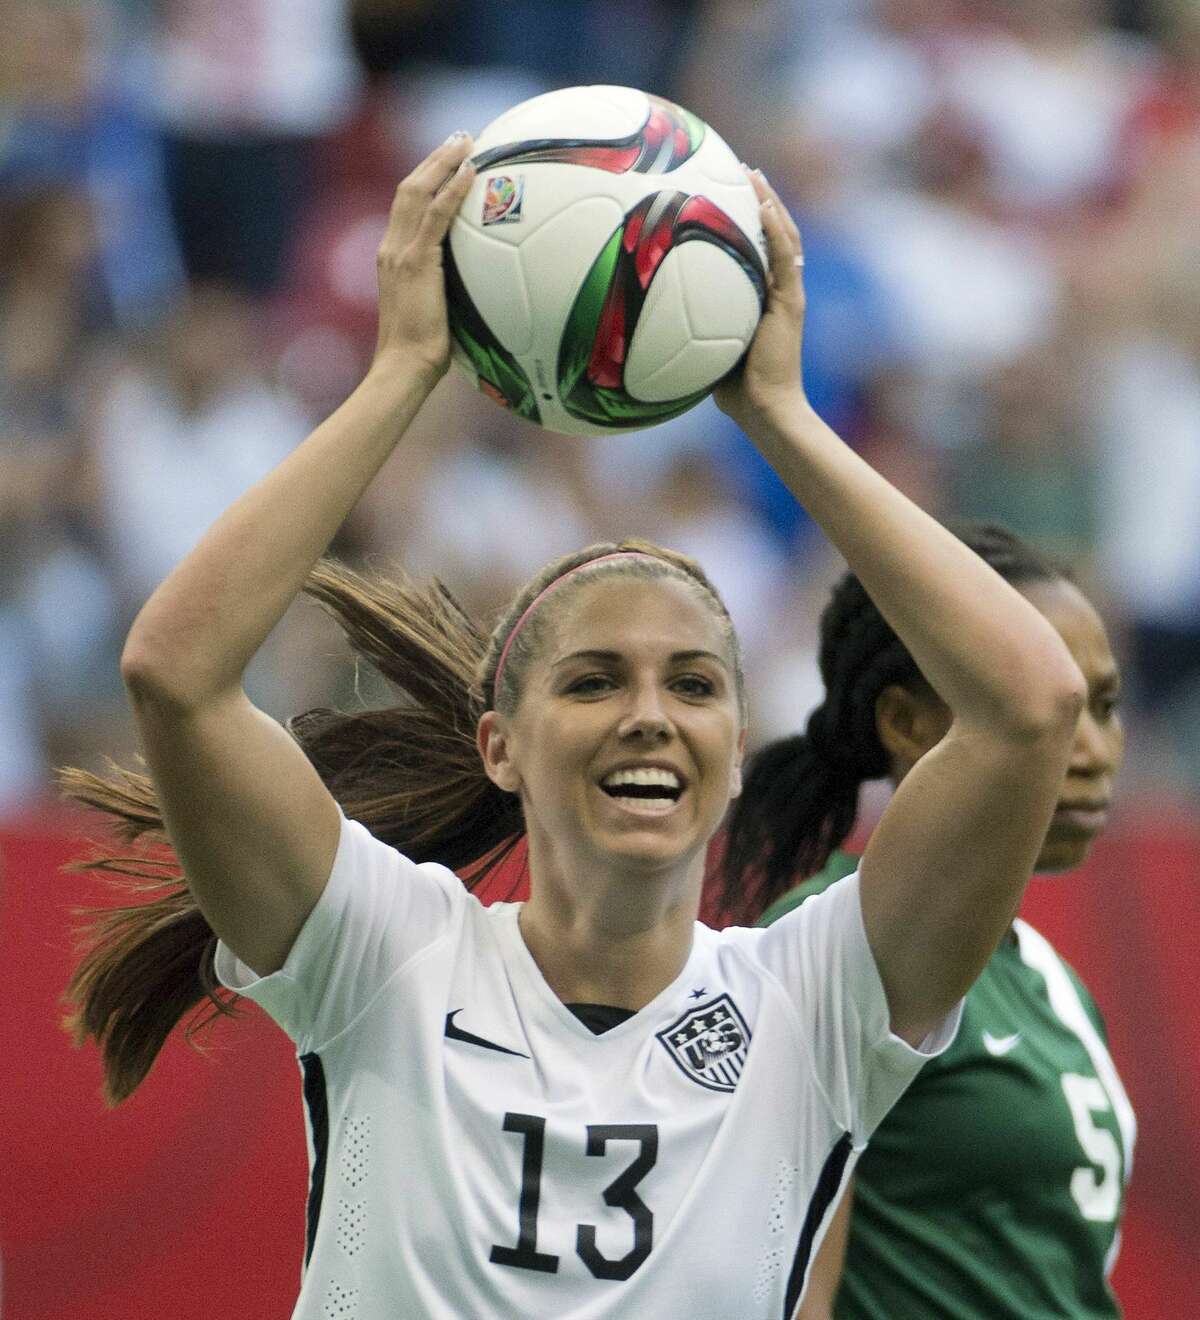 Alex Morgan is hoping to help the United States win a third Women’s World Cup title.